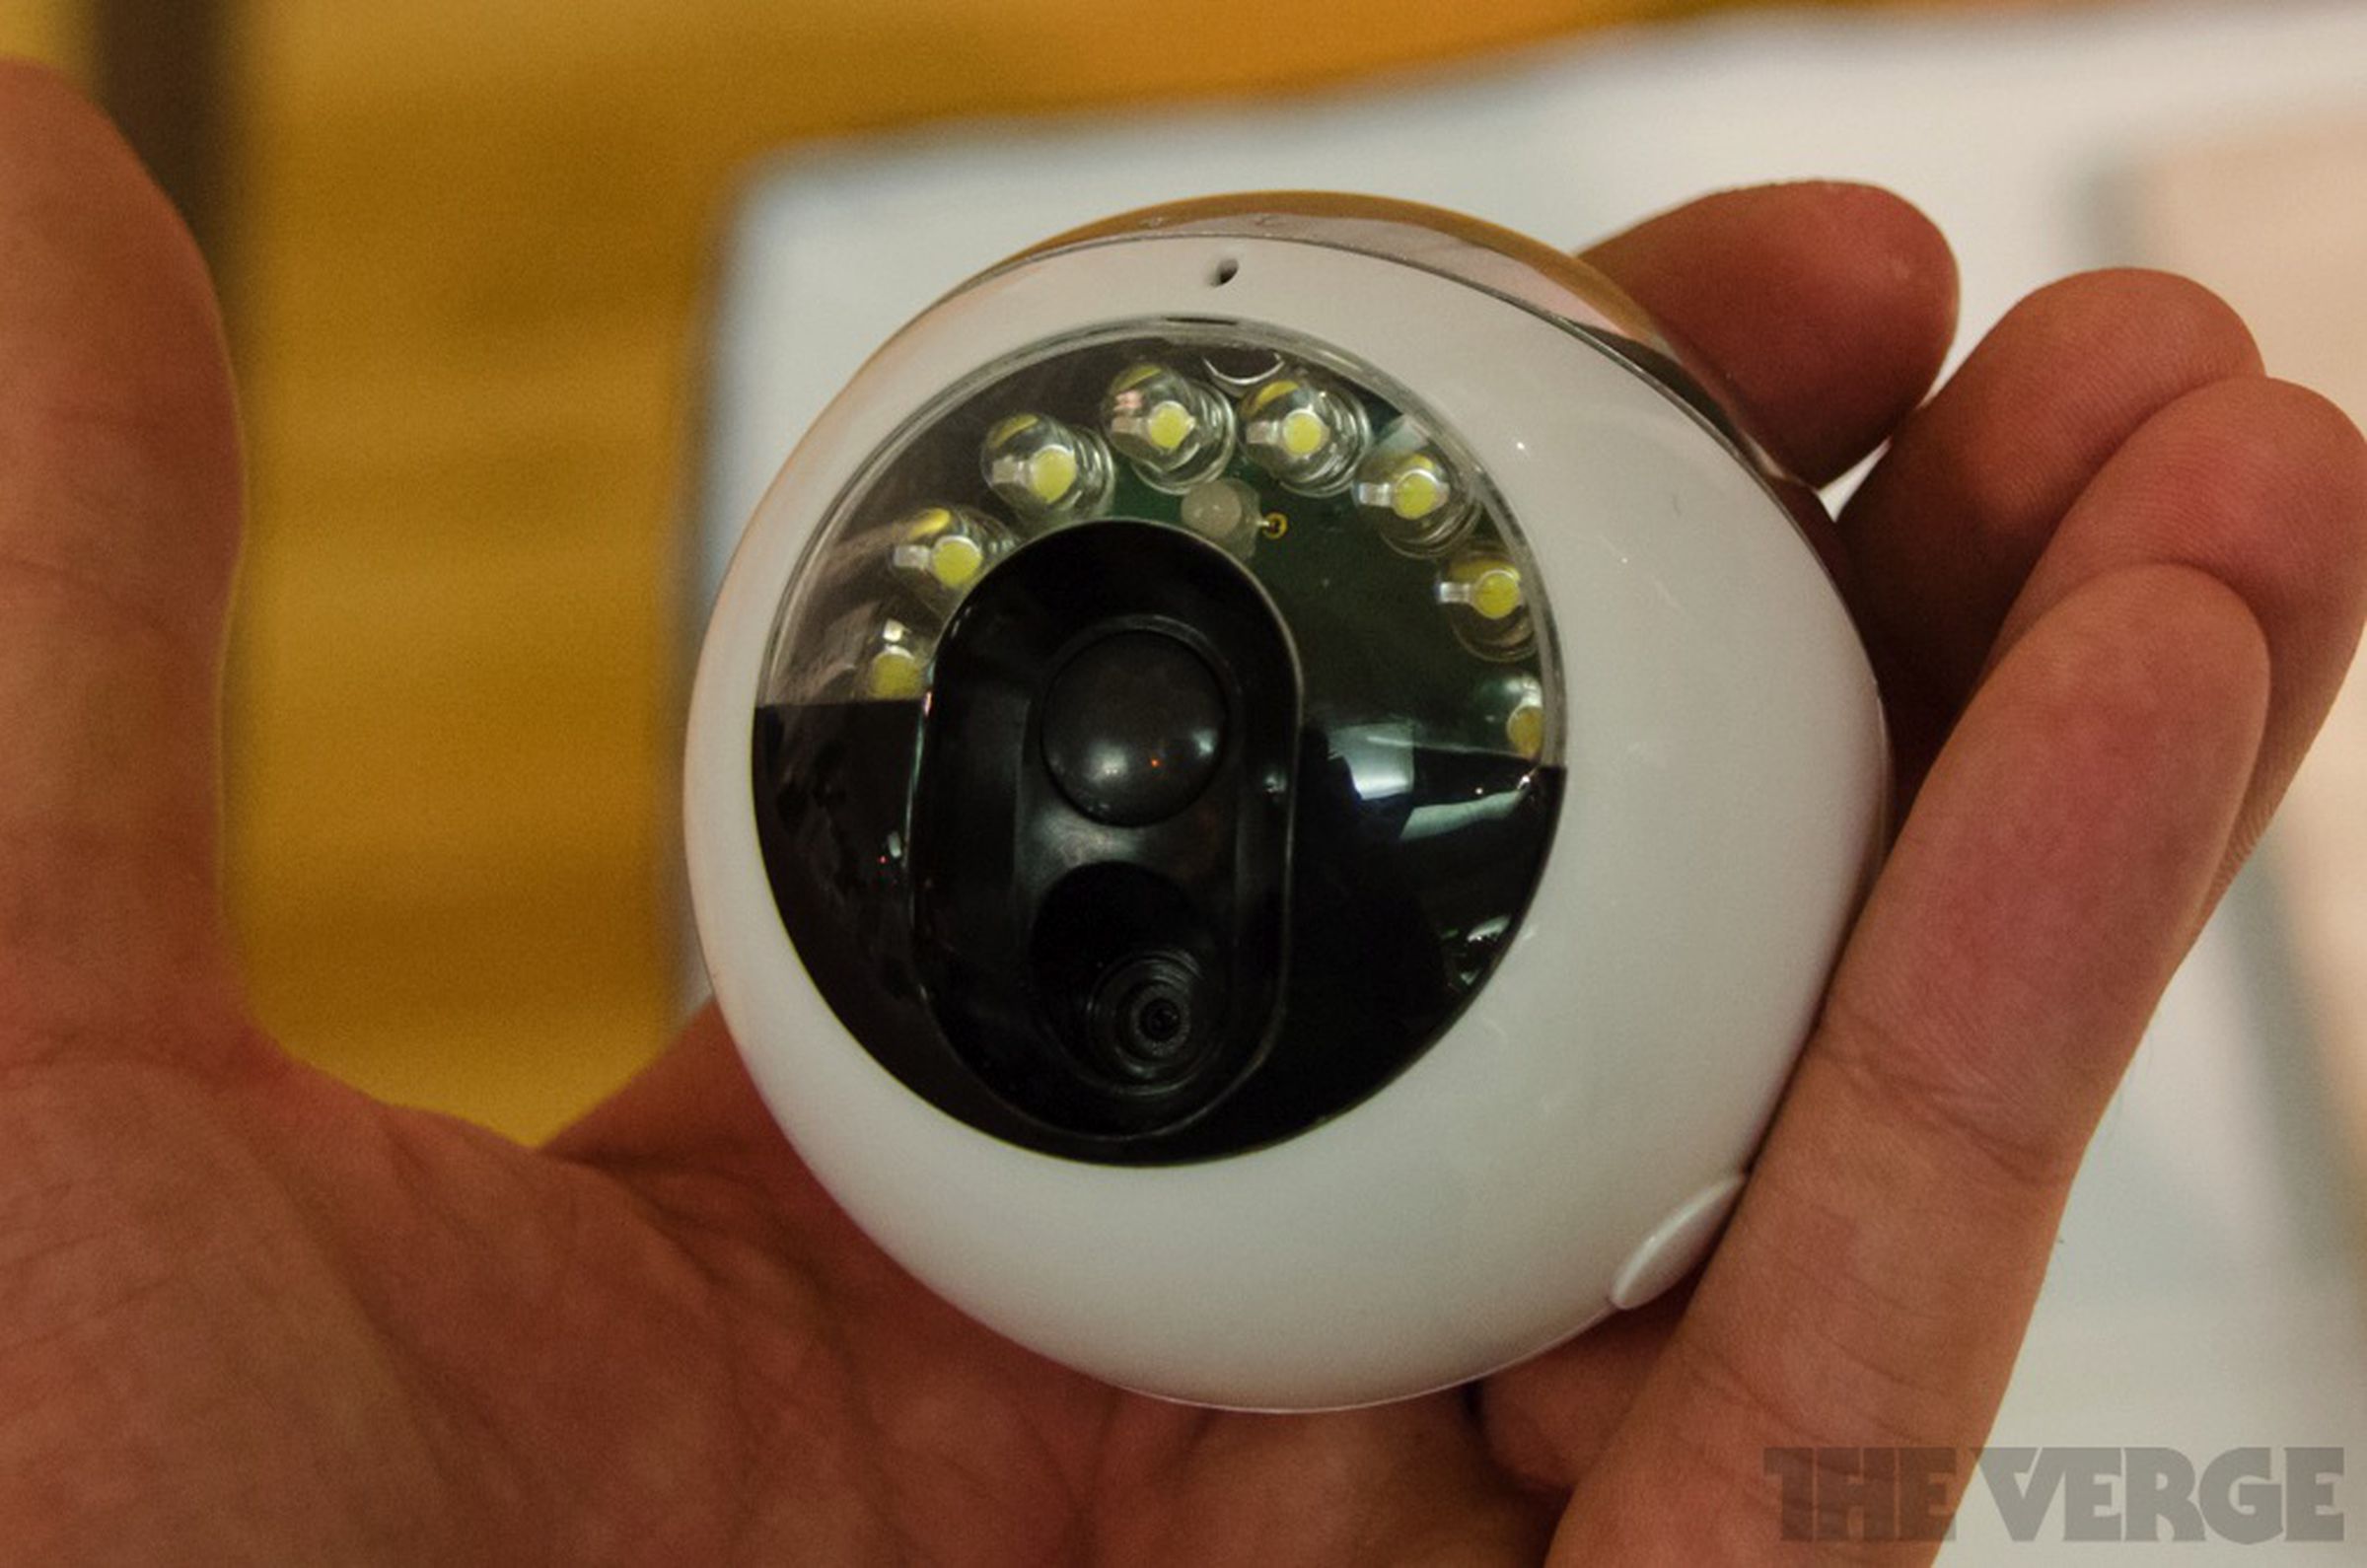 Hive security camera system hands-on photos